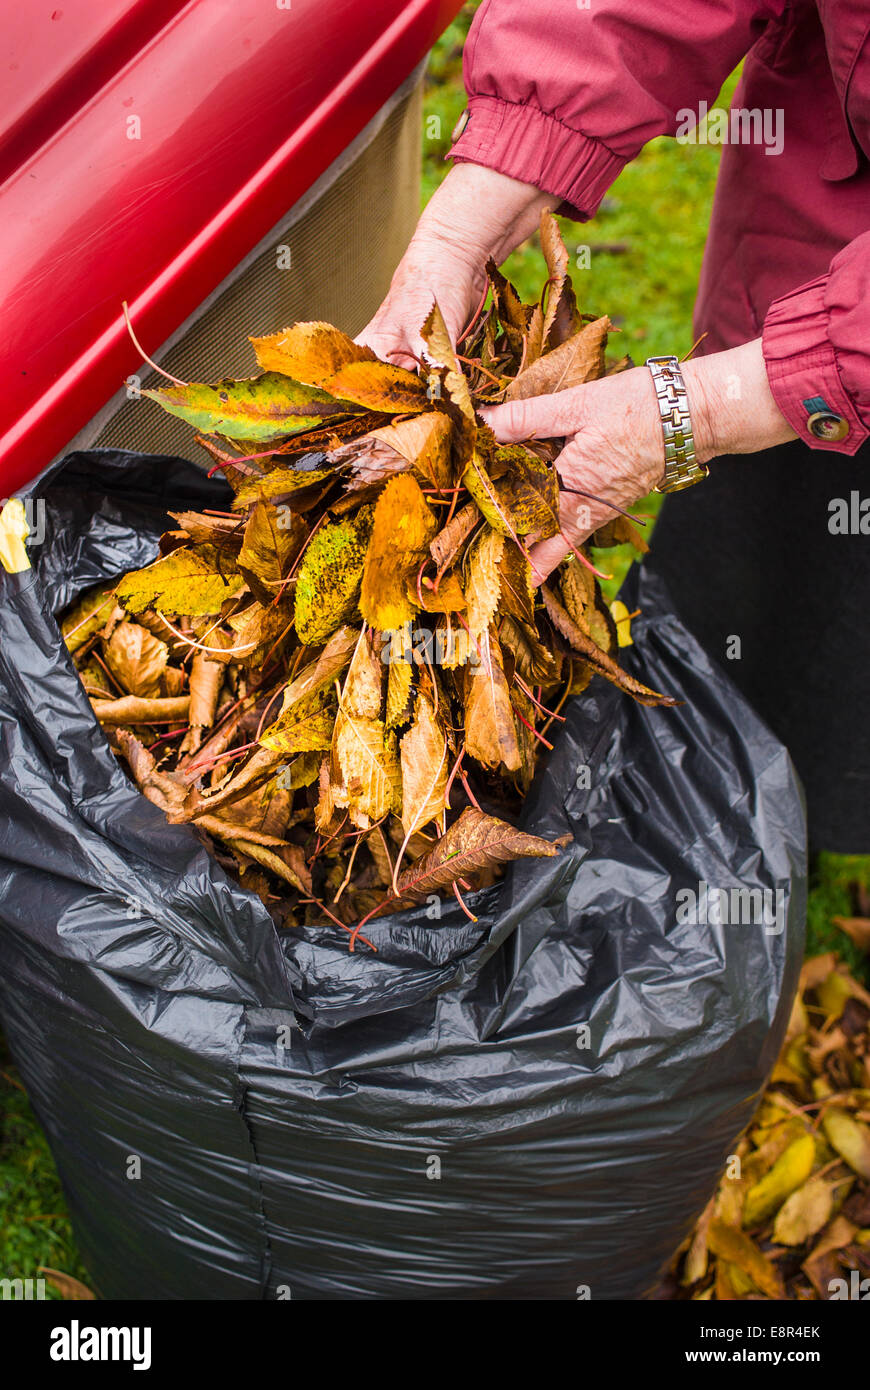 Collecting and bagging fallen tree leaves on a lawn Stock Photo